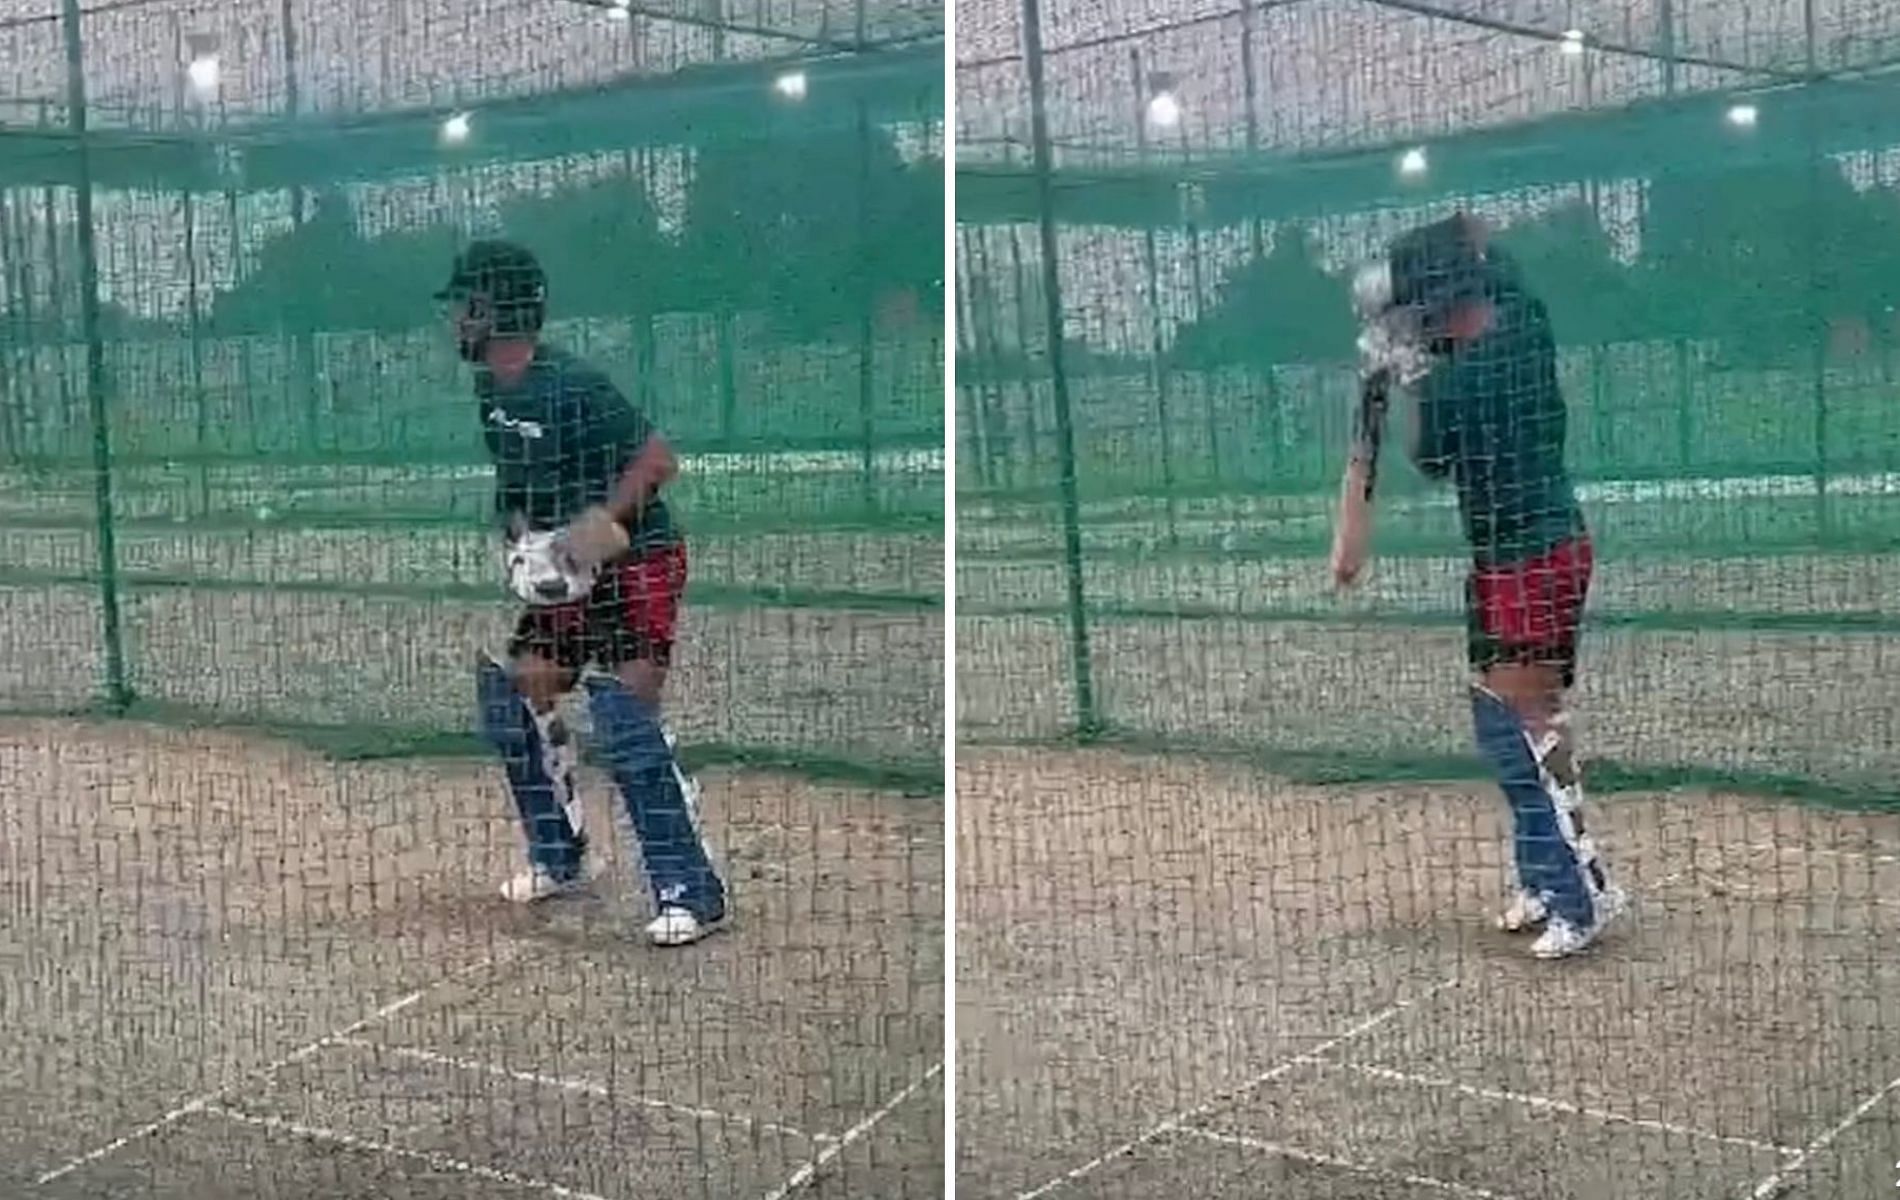 Shikhar Dhawan during a practice session. (Pics: Instagram)